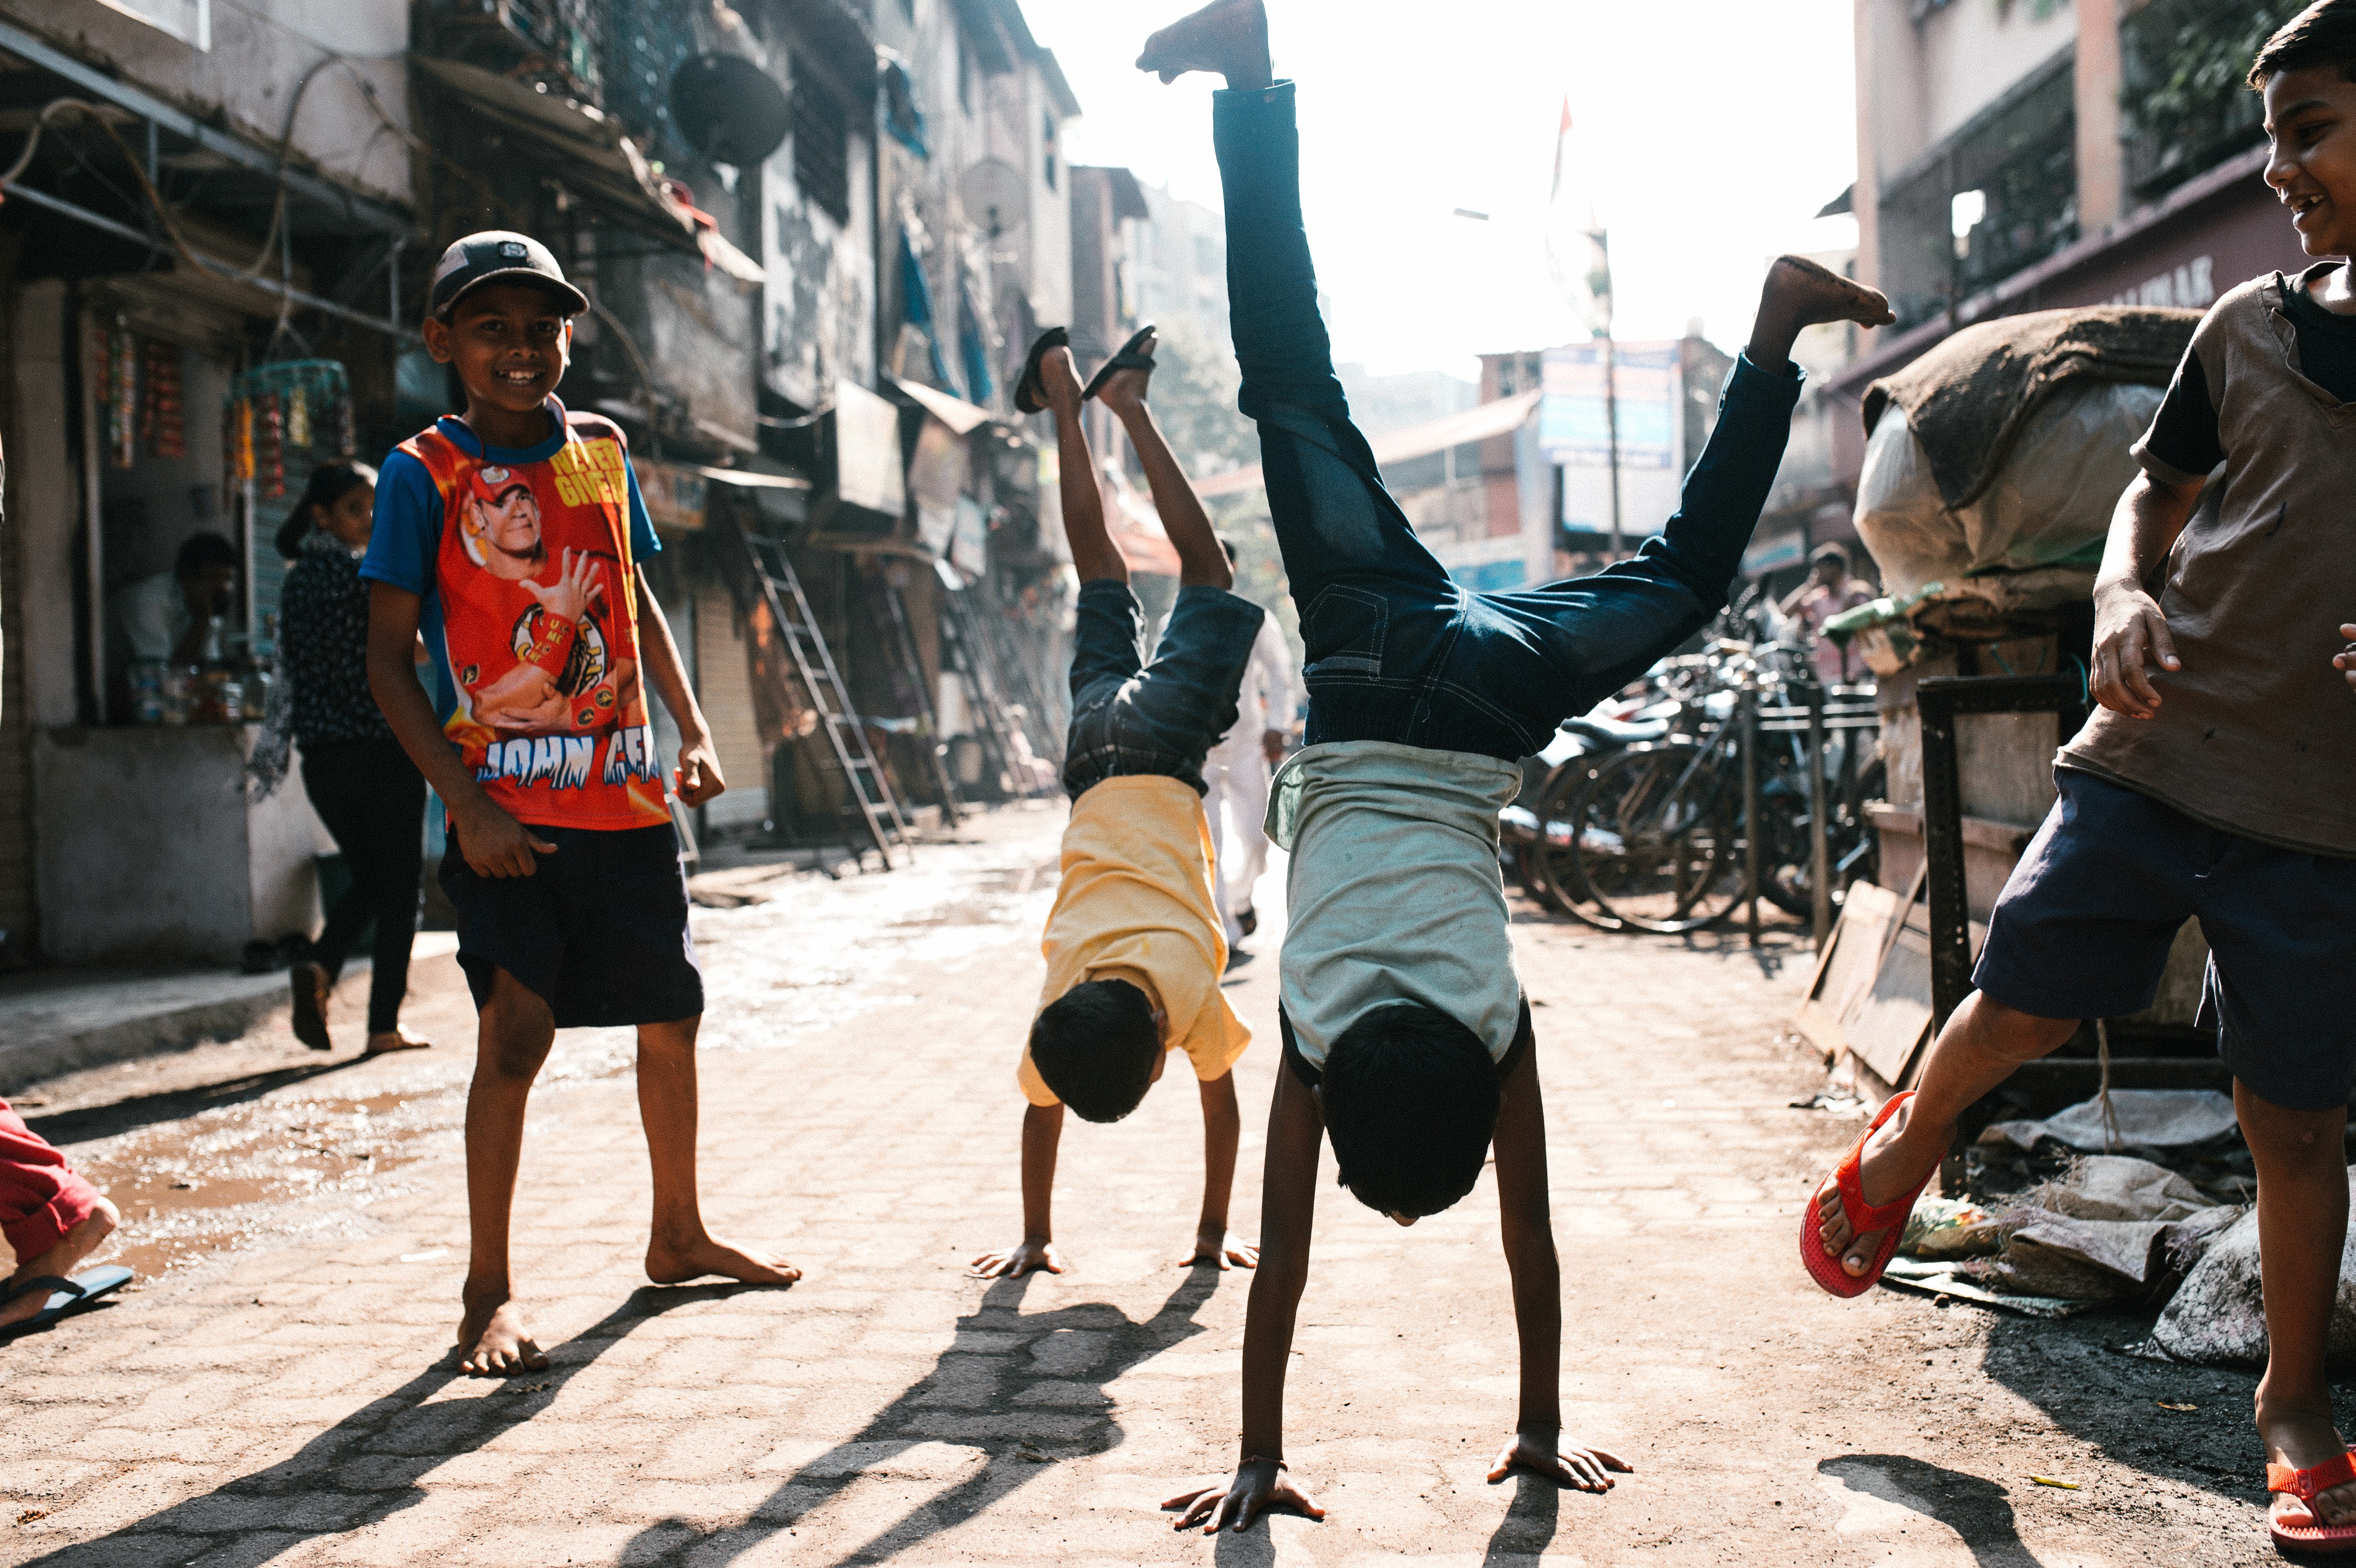 Mumbai’s Dharavi slum is home to a growing number of hip hop, acting and coding classes for disadvantaged children from the area. Photo: Shutterstock